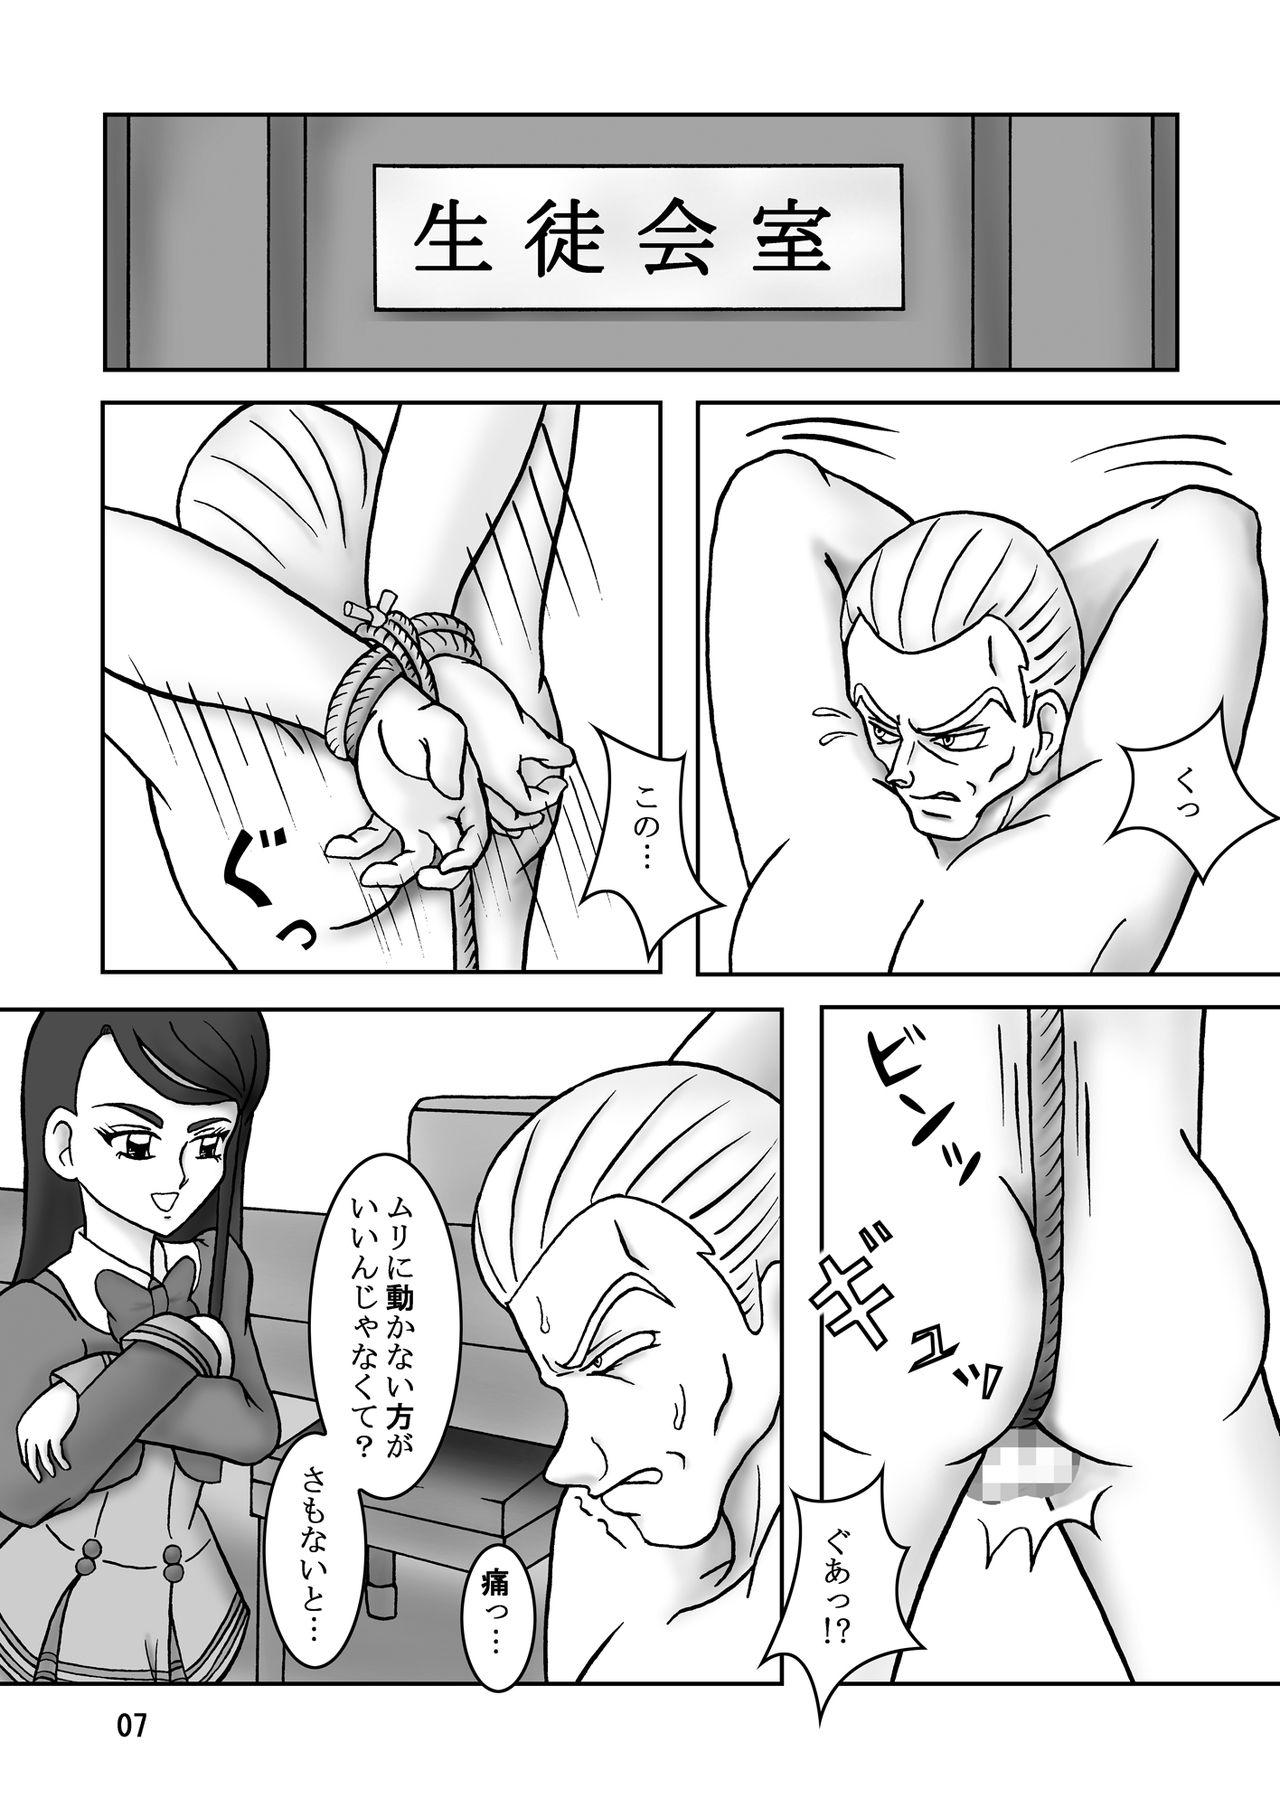 Argentino Yes！ズリキュア5 - Yes precure 5 Hijab - Page 9